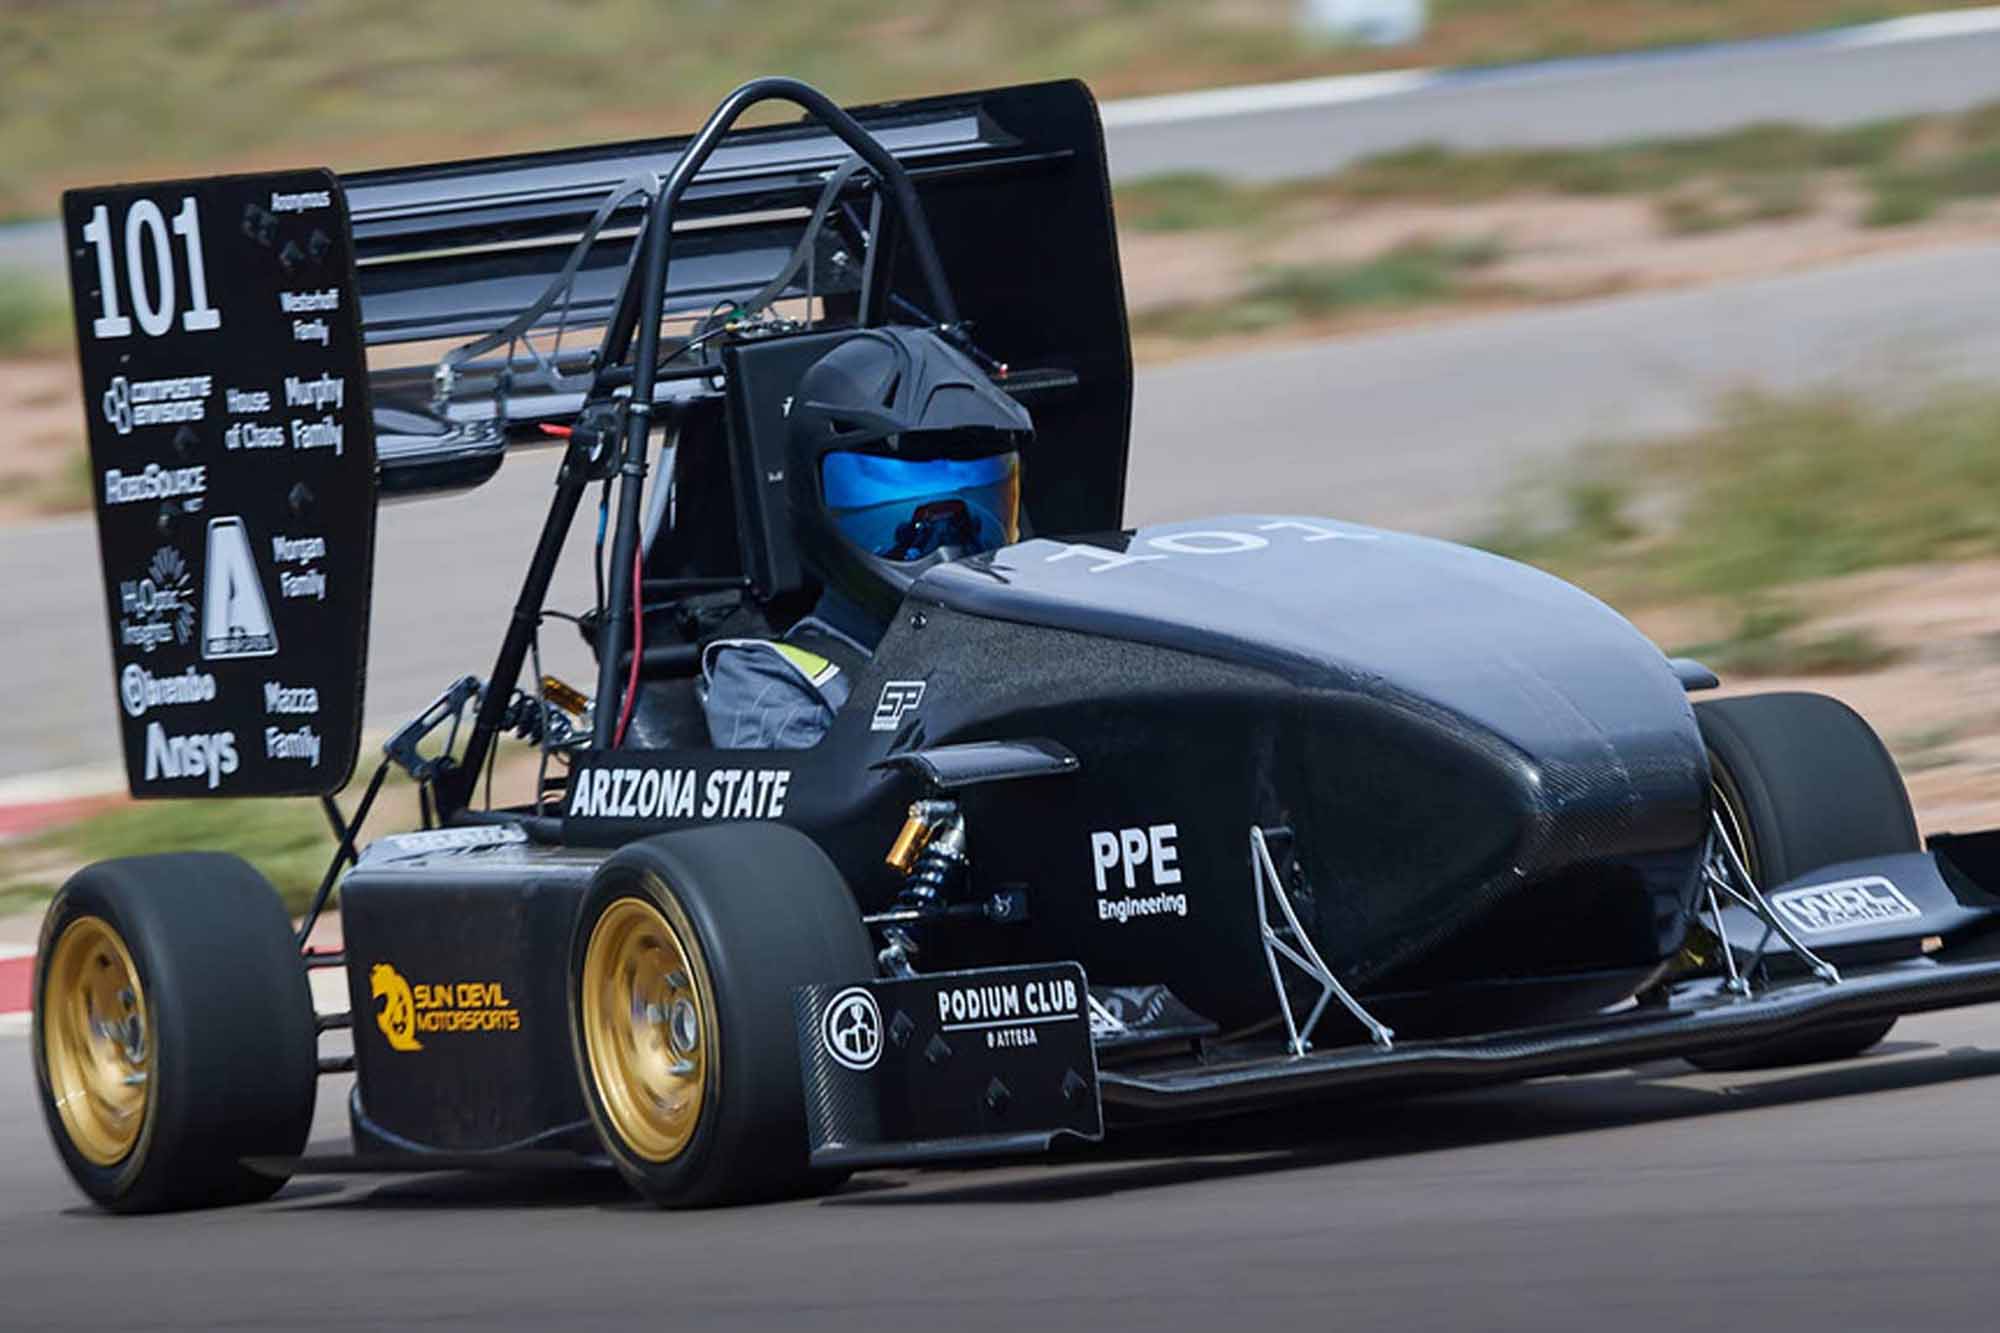 A driver is driving the latest Sun Devil Motorsports race car, the SDM23, on a racetrack, the blurred desert background showing the high speed of travel.